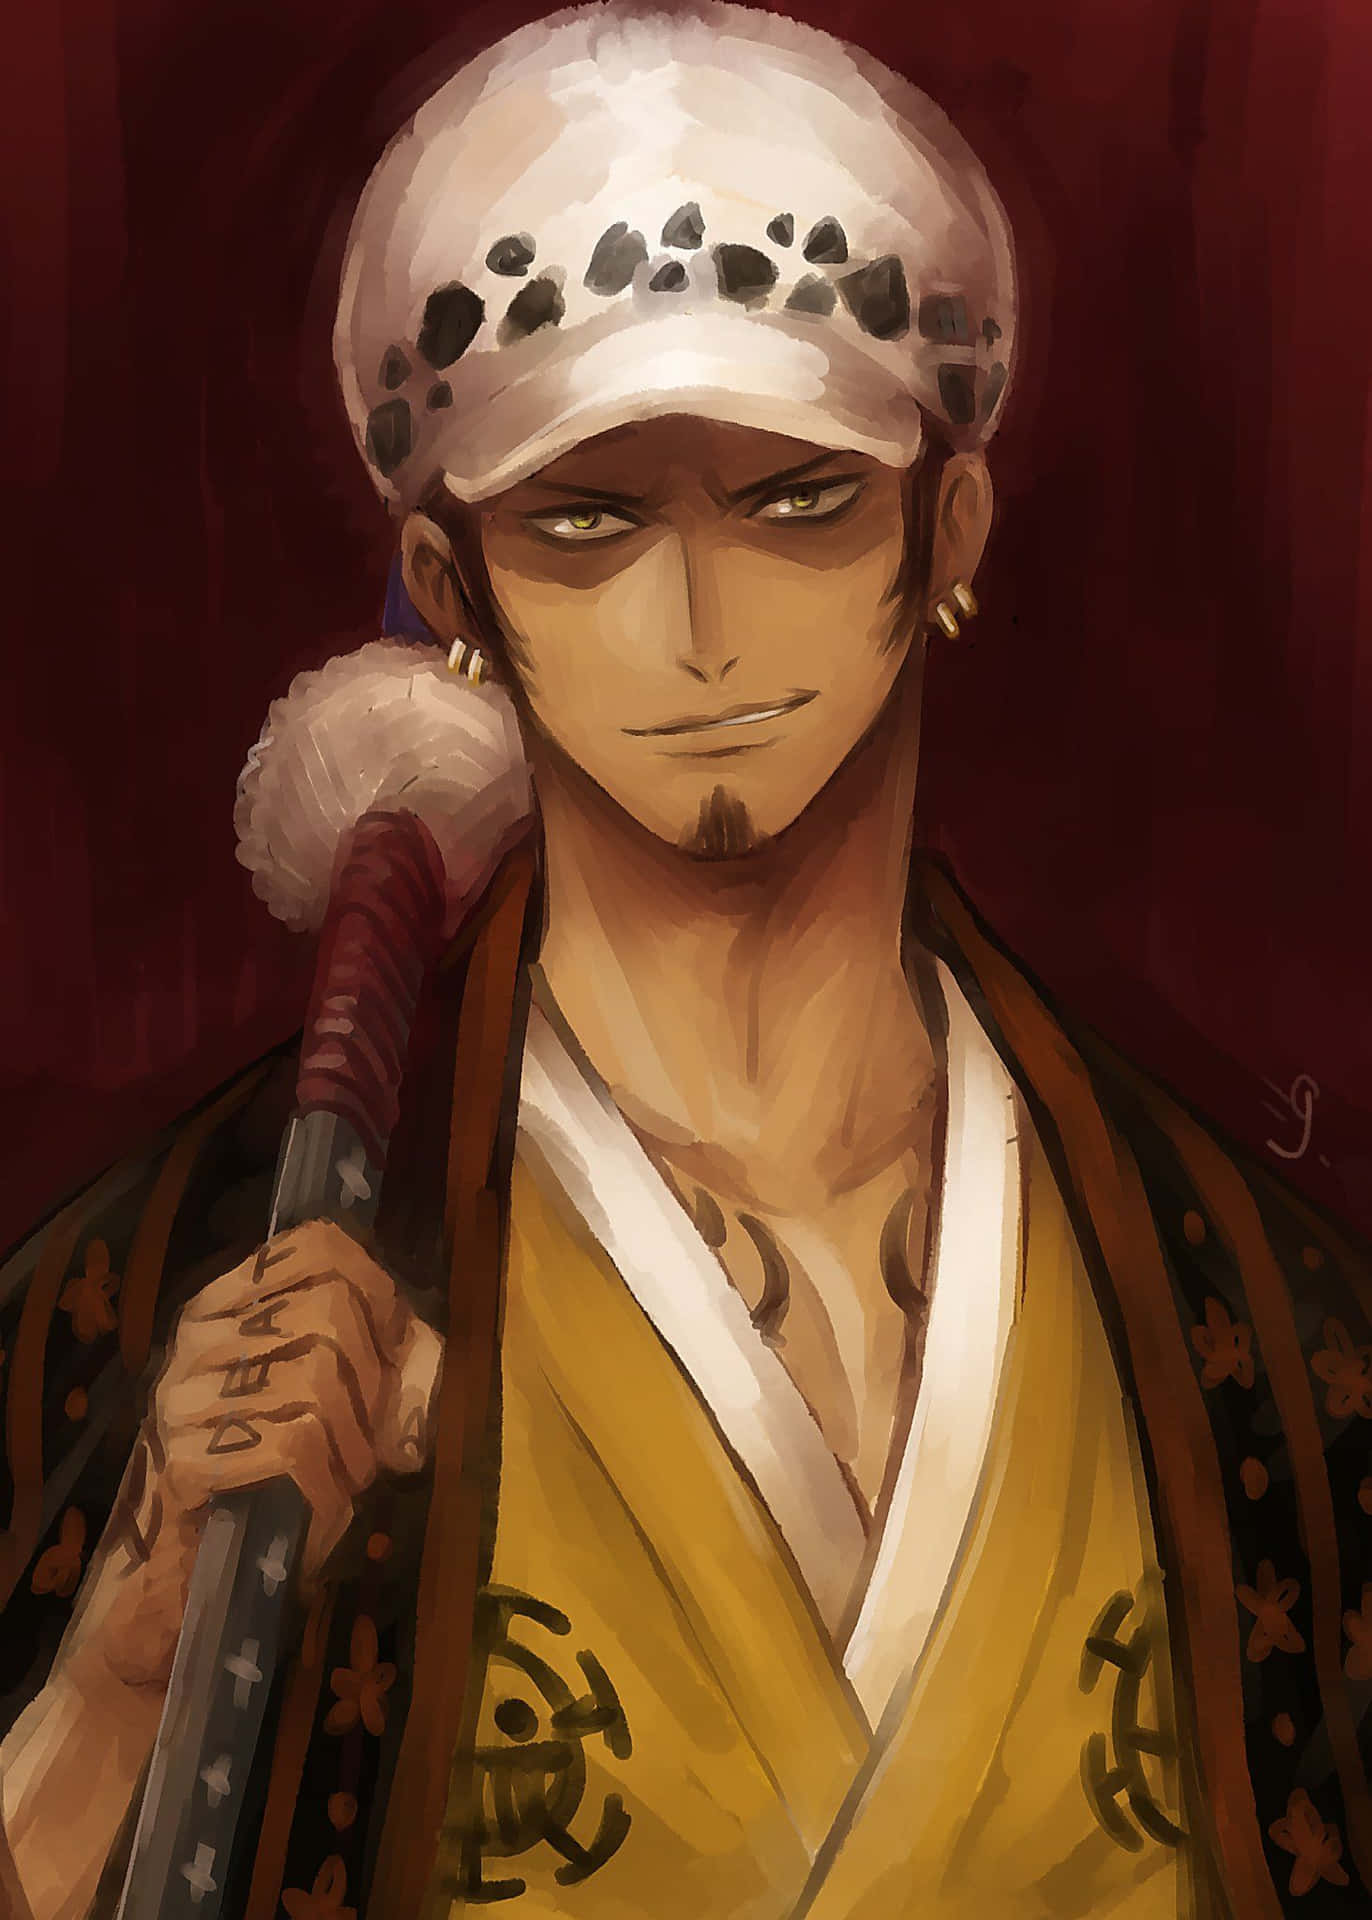 Join Trafalgar Law and the Straw Hat Pirates on their Grand Adventure Wallpaper